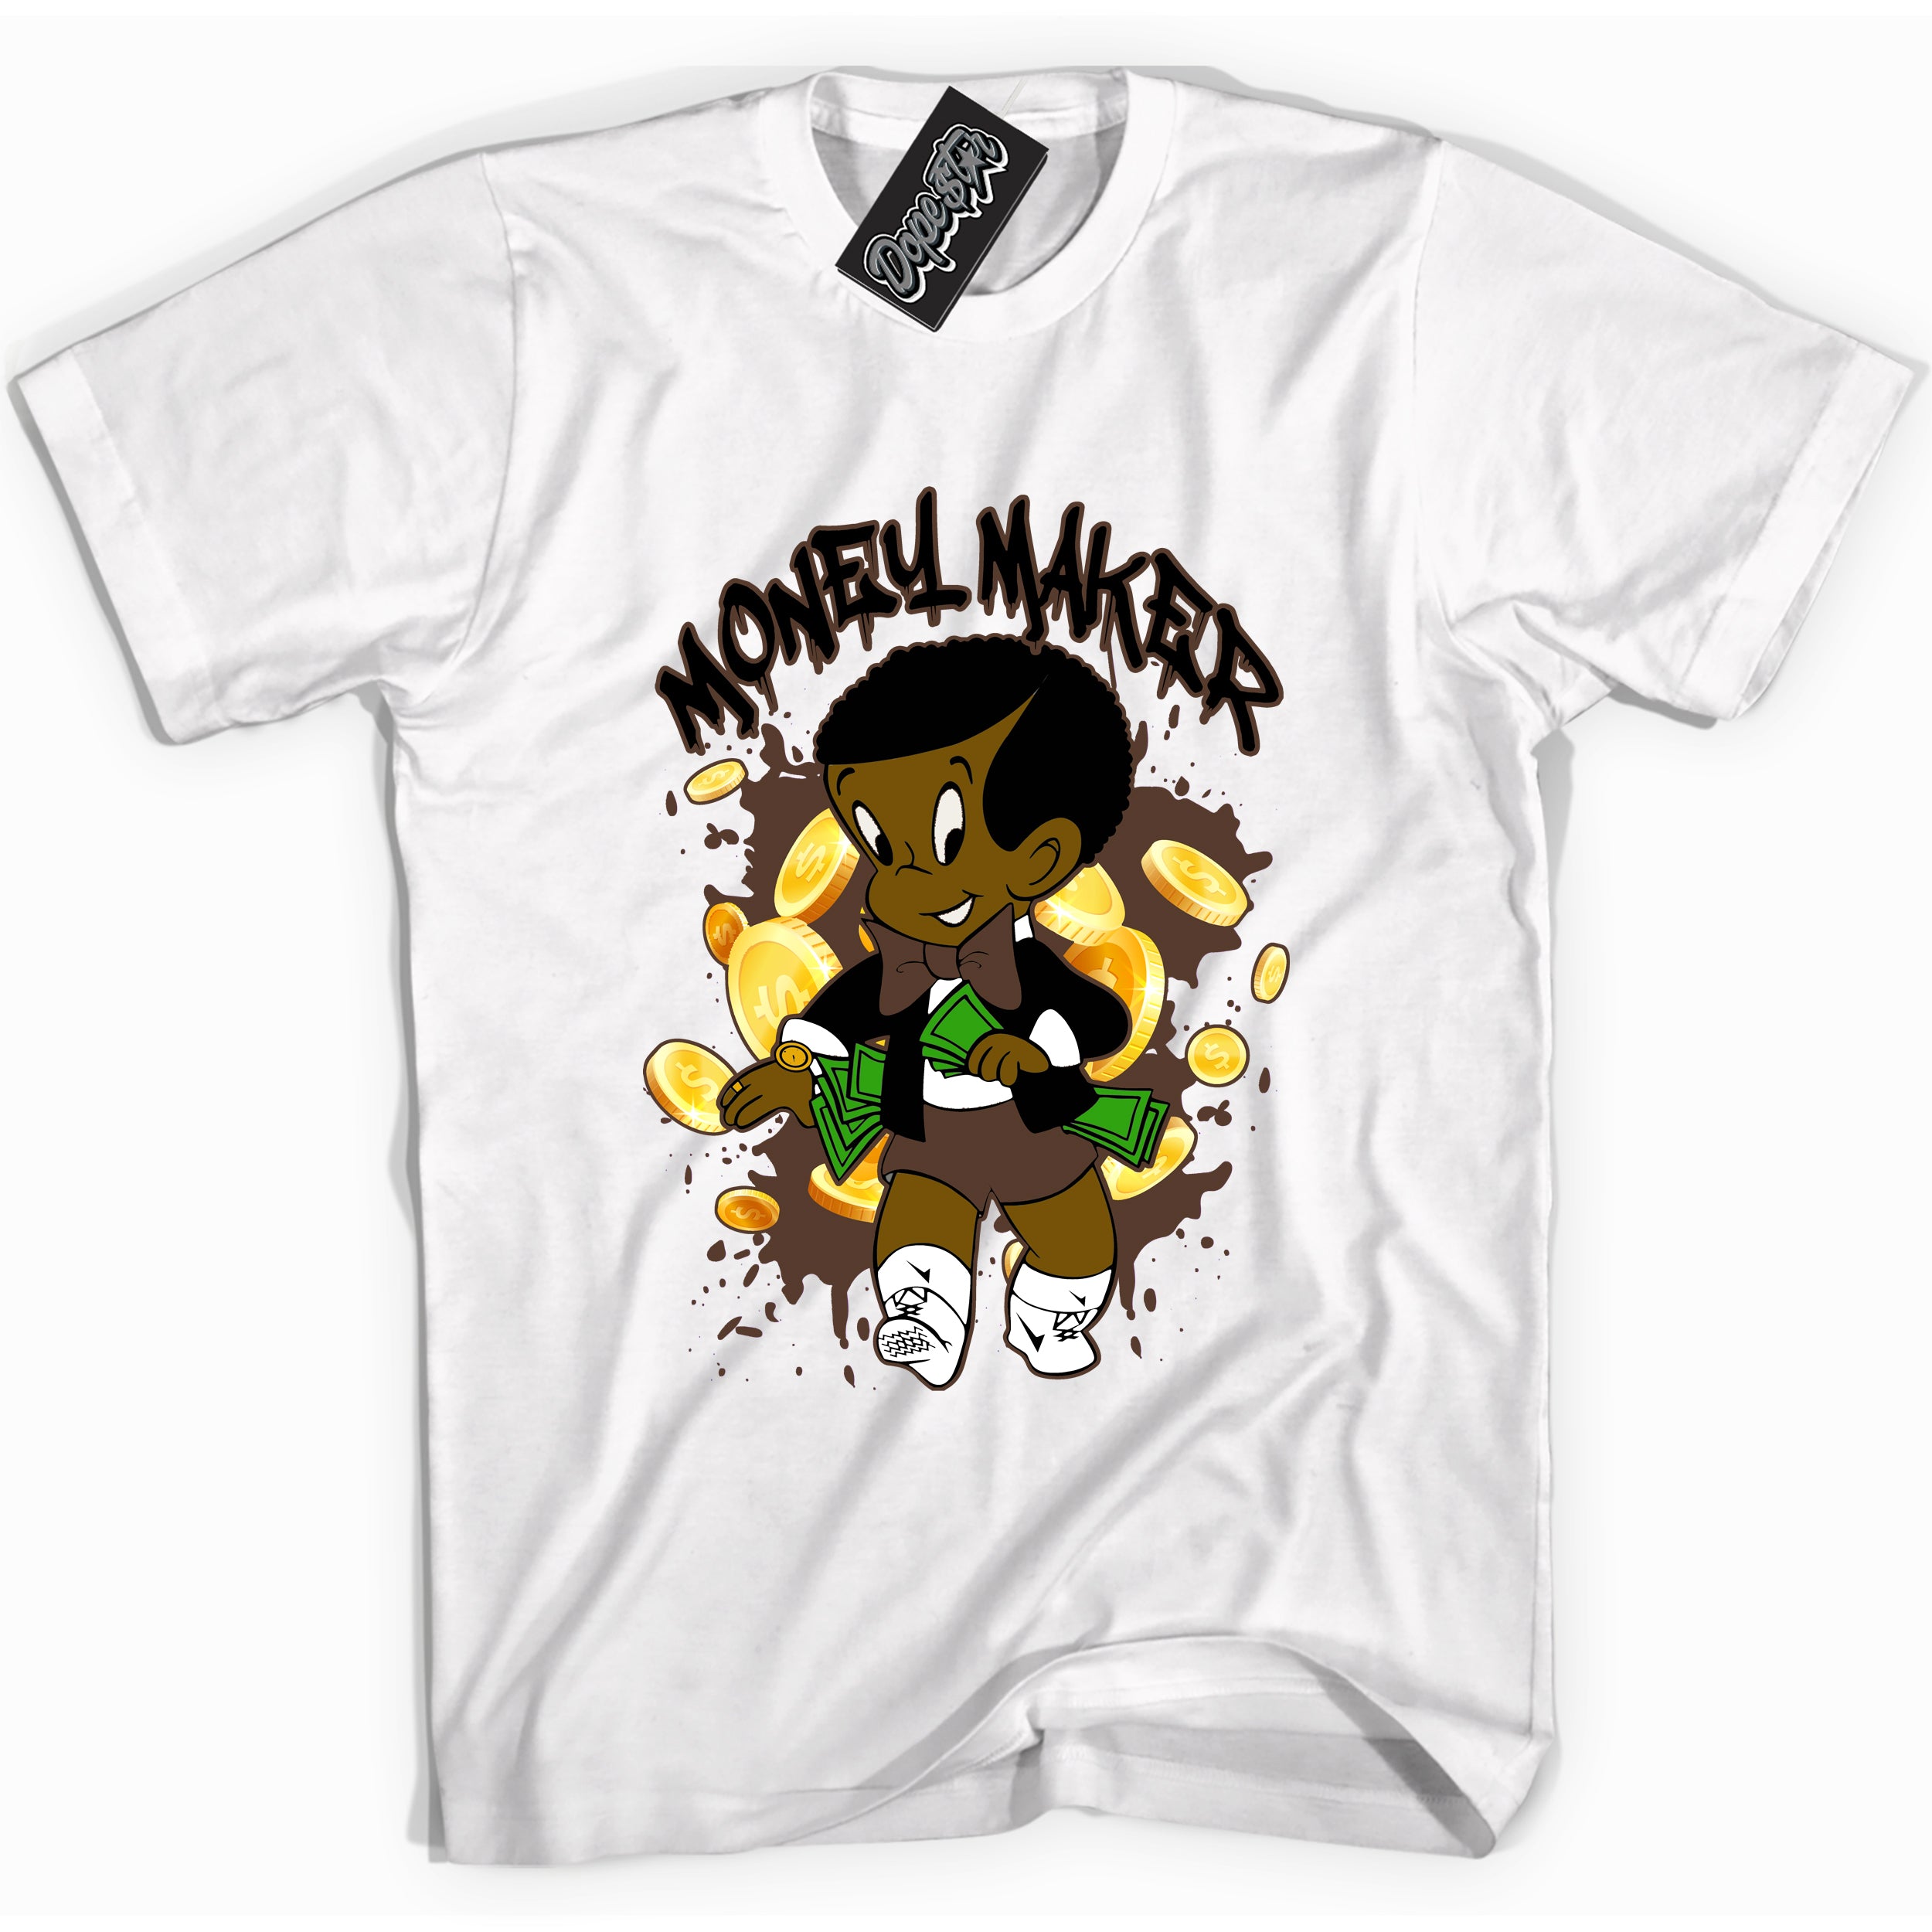 Cool White graphic tee with “ Money Maker ” design, that perfectly matches Palomino 1s sneakers 